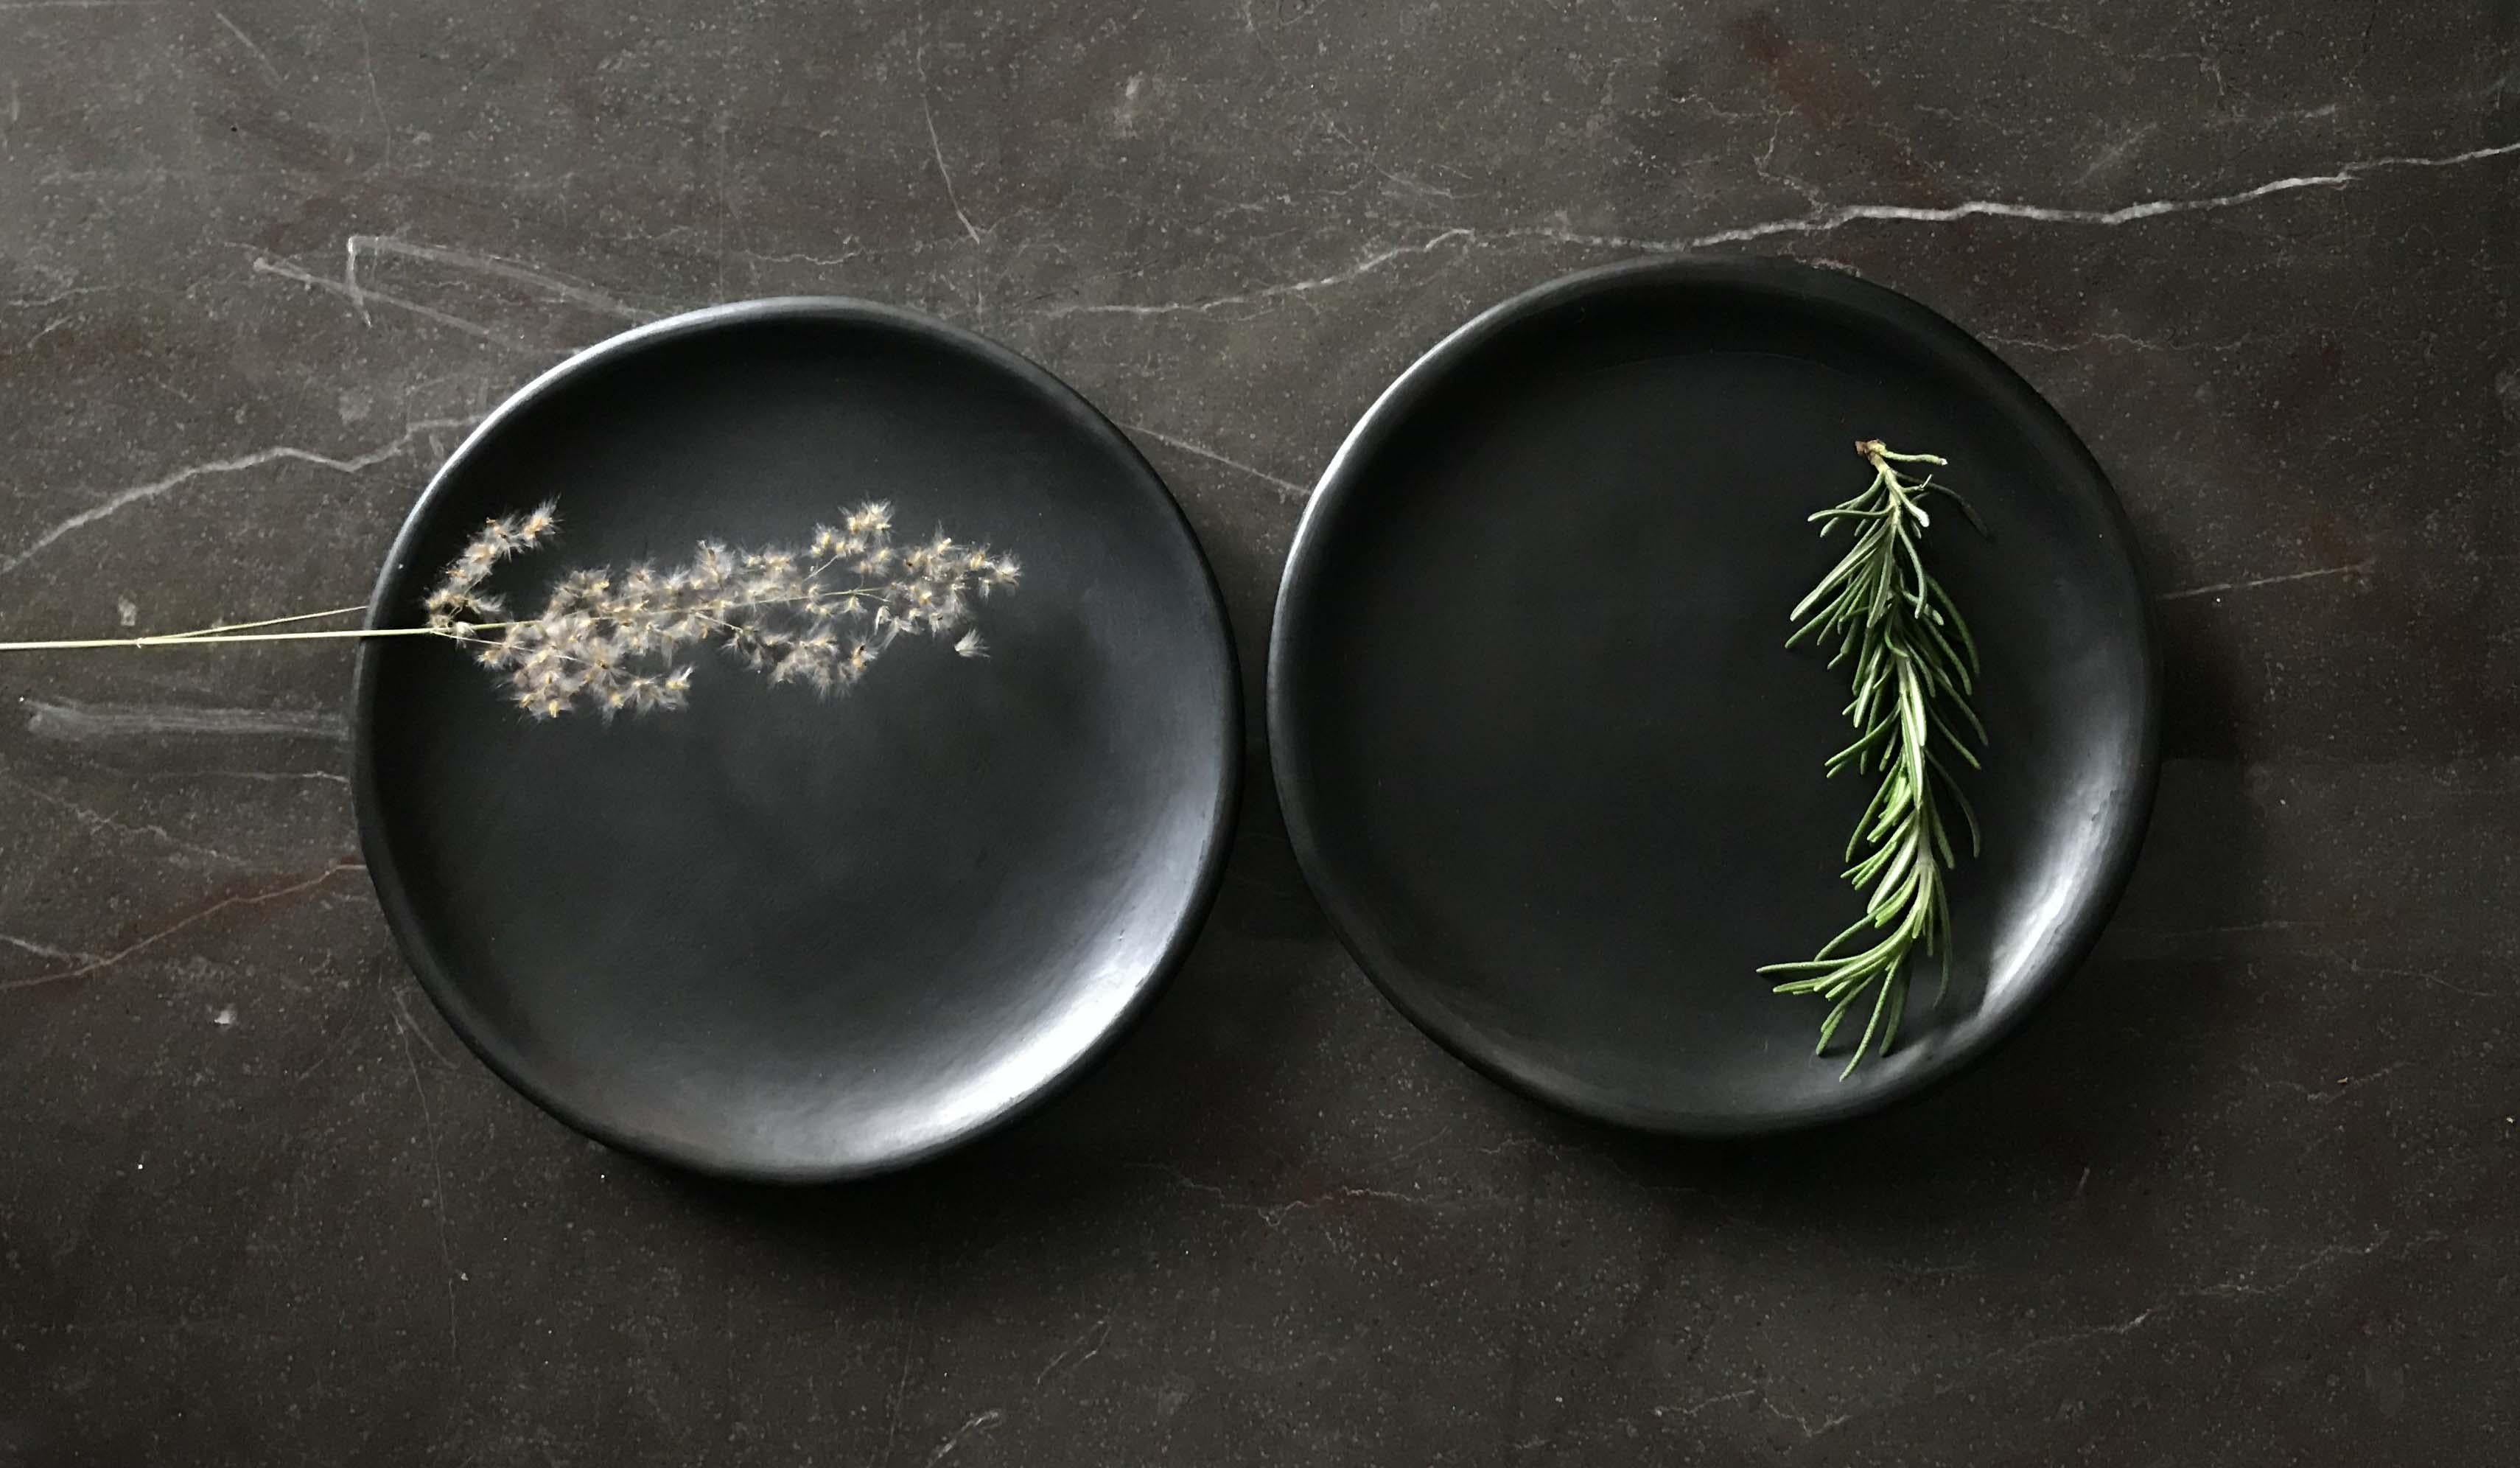 Oaxacan black clay 20cm plates handmade tableware burnished barro negro Oaxaca. Set of 8 pieces 

The soft and rich colour makes this side plate a stylish partner to bread, butter or more spectacular starters.

Handmade in Oaxaca, a state rich